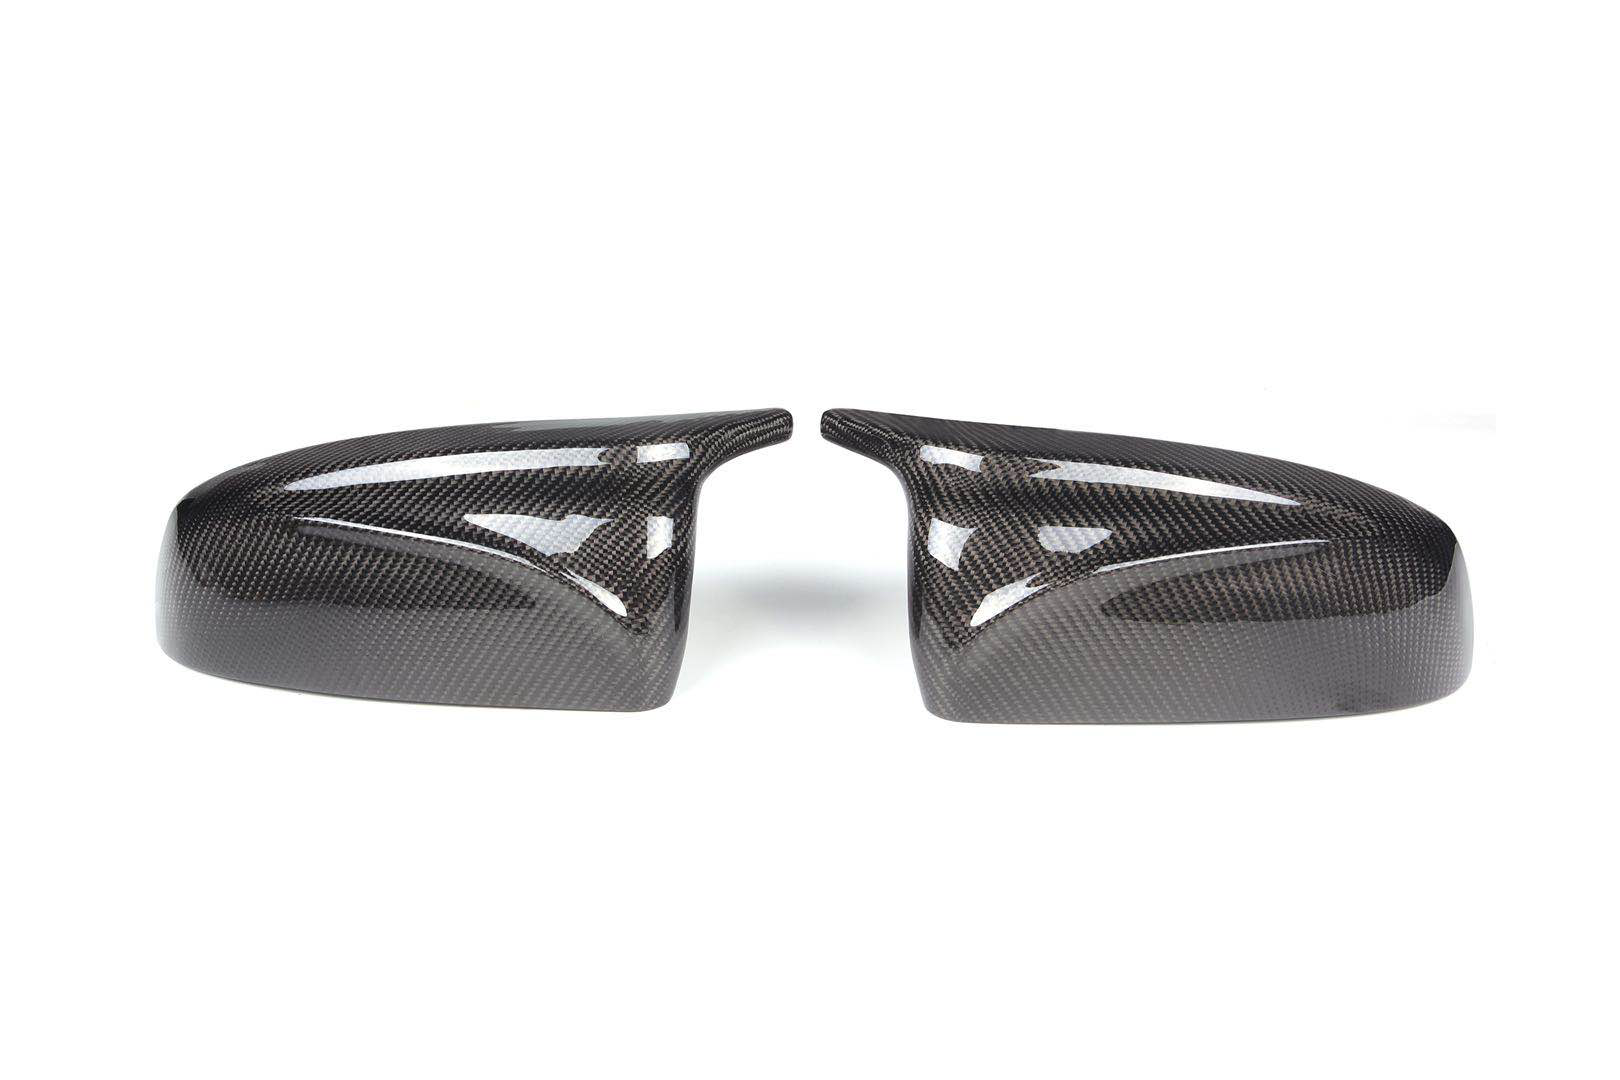 2Pcs Car Real Carbon Fiber Rear View Mirror Caps Covers Replacement Left & Right for BMW X5 X6 E70 E71 2007-2013